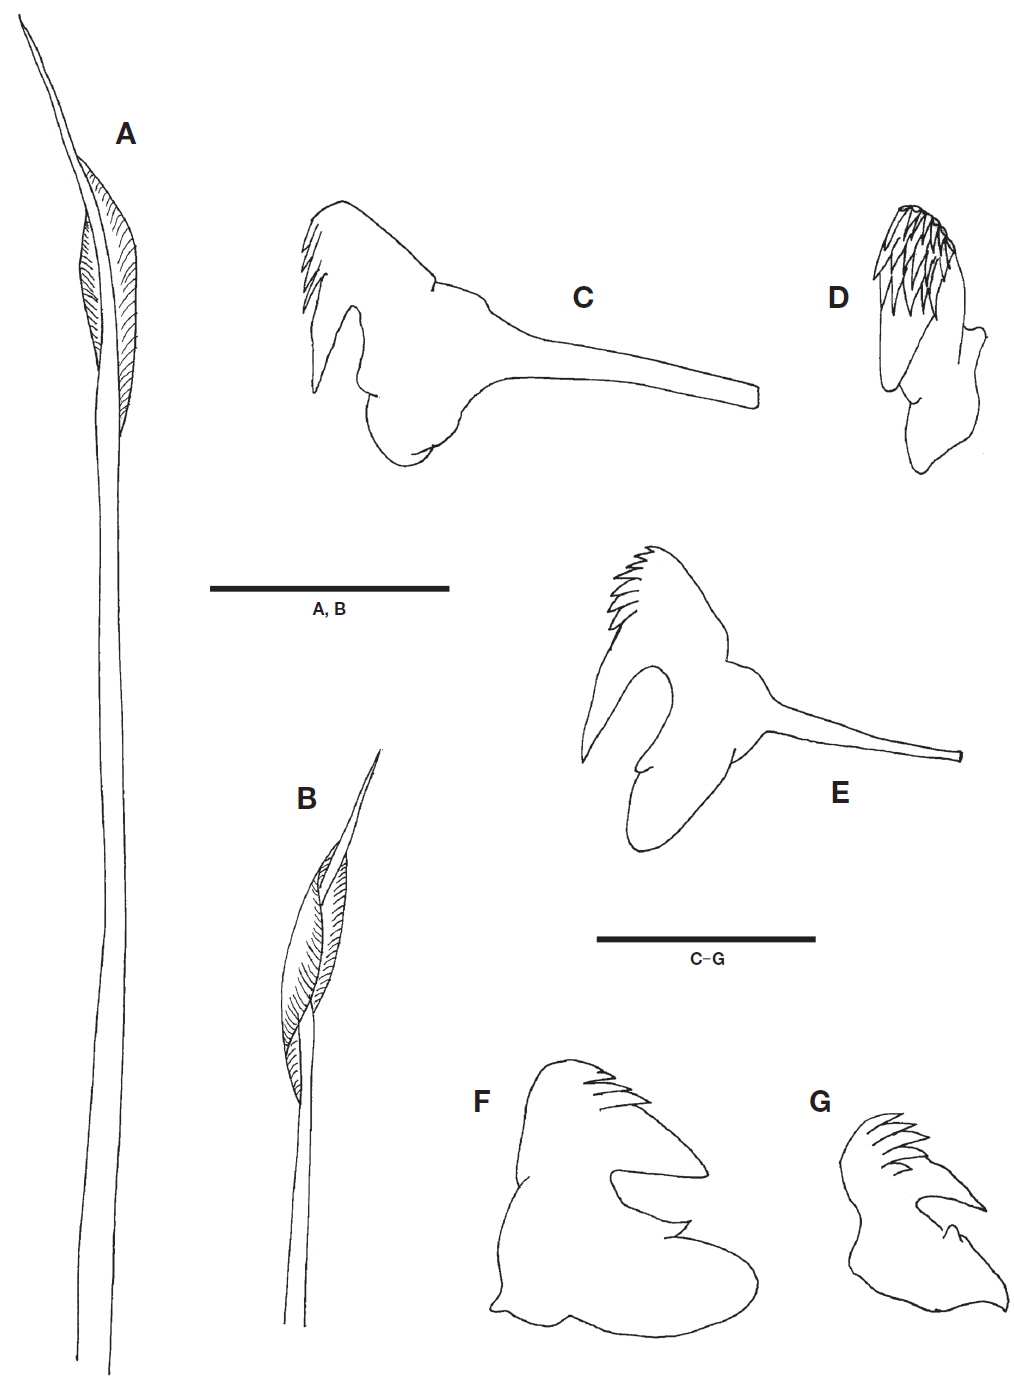 Pista shizugawaensis Nishi and Tanaka, 2006. A, B, Notosetae from 7th segment, with long (A) and short lengths (B); C-F, Uncini (neurosetae) of thoracic segments, arranged in single row (C) and with crested head (D) on 7th segment, arranged in double rows on 11th segment (E) and 18th segment (F); G, Abdominal uncini. Scale bars: A, B=0.2 mm, C-G=0.05 mm.